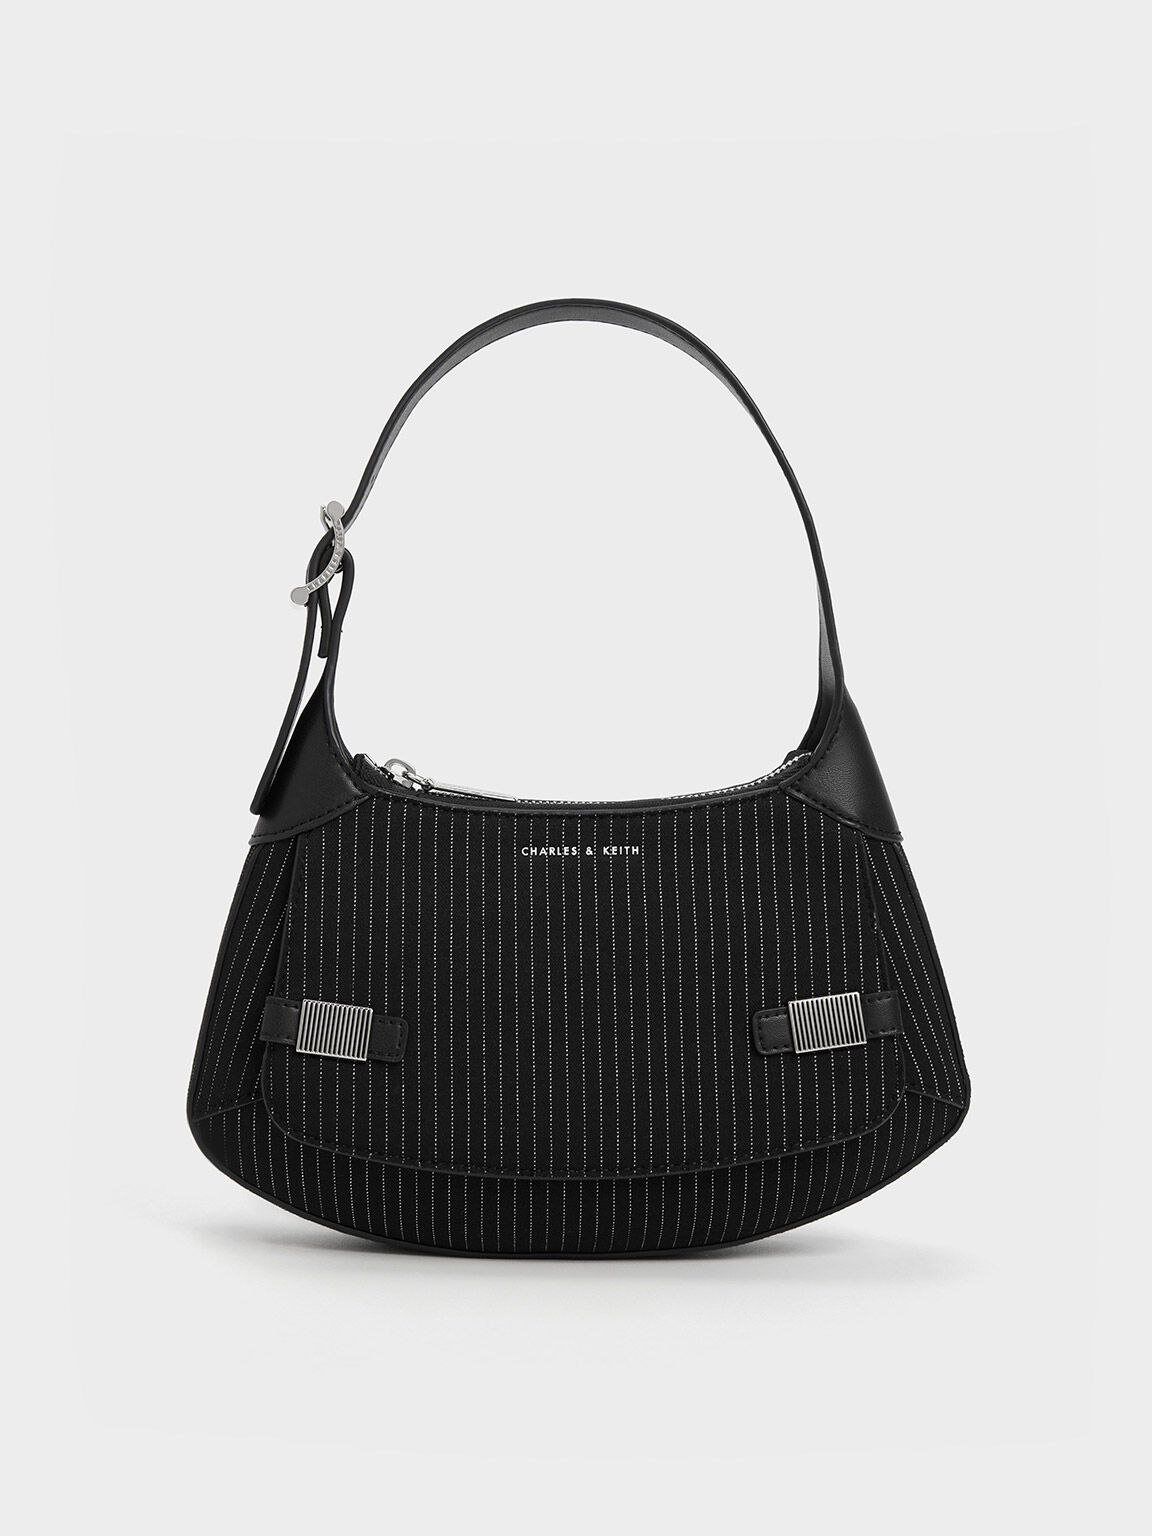 Locò Small Shoulder Bag With Jewel Logo for Woman in Poudre | Valentino US